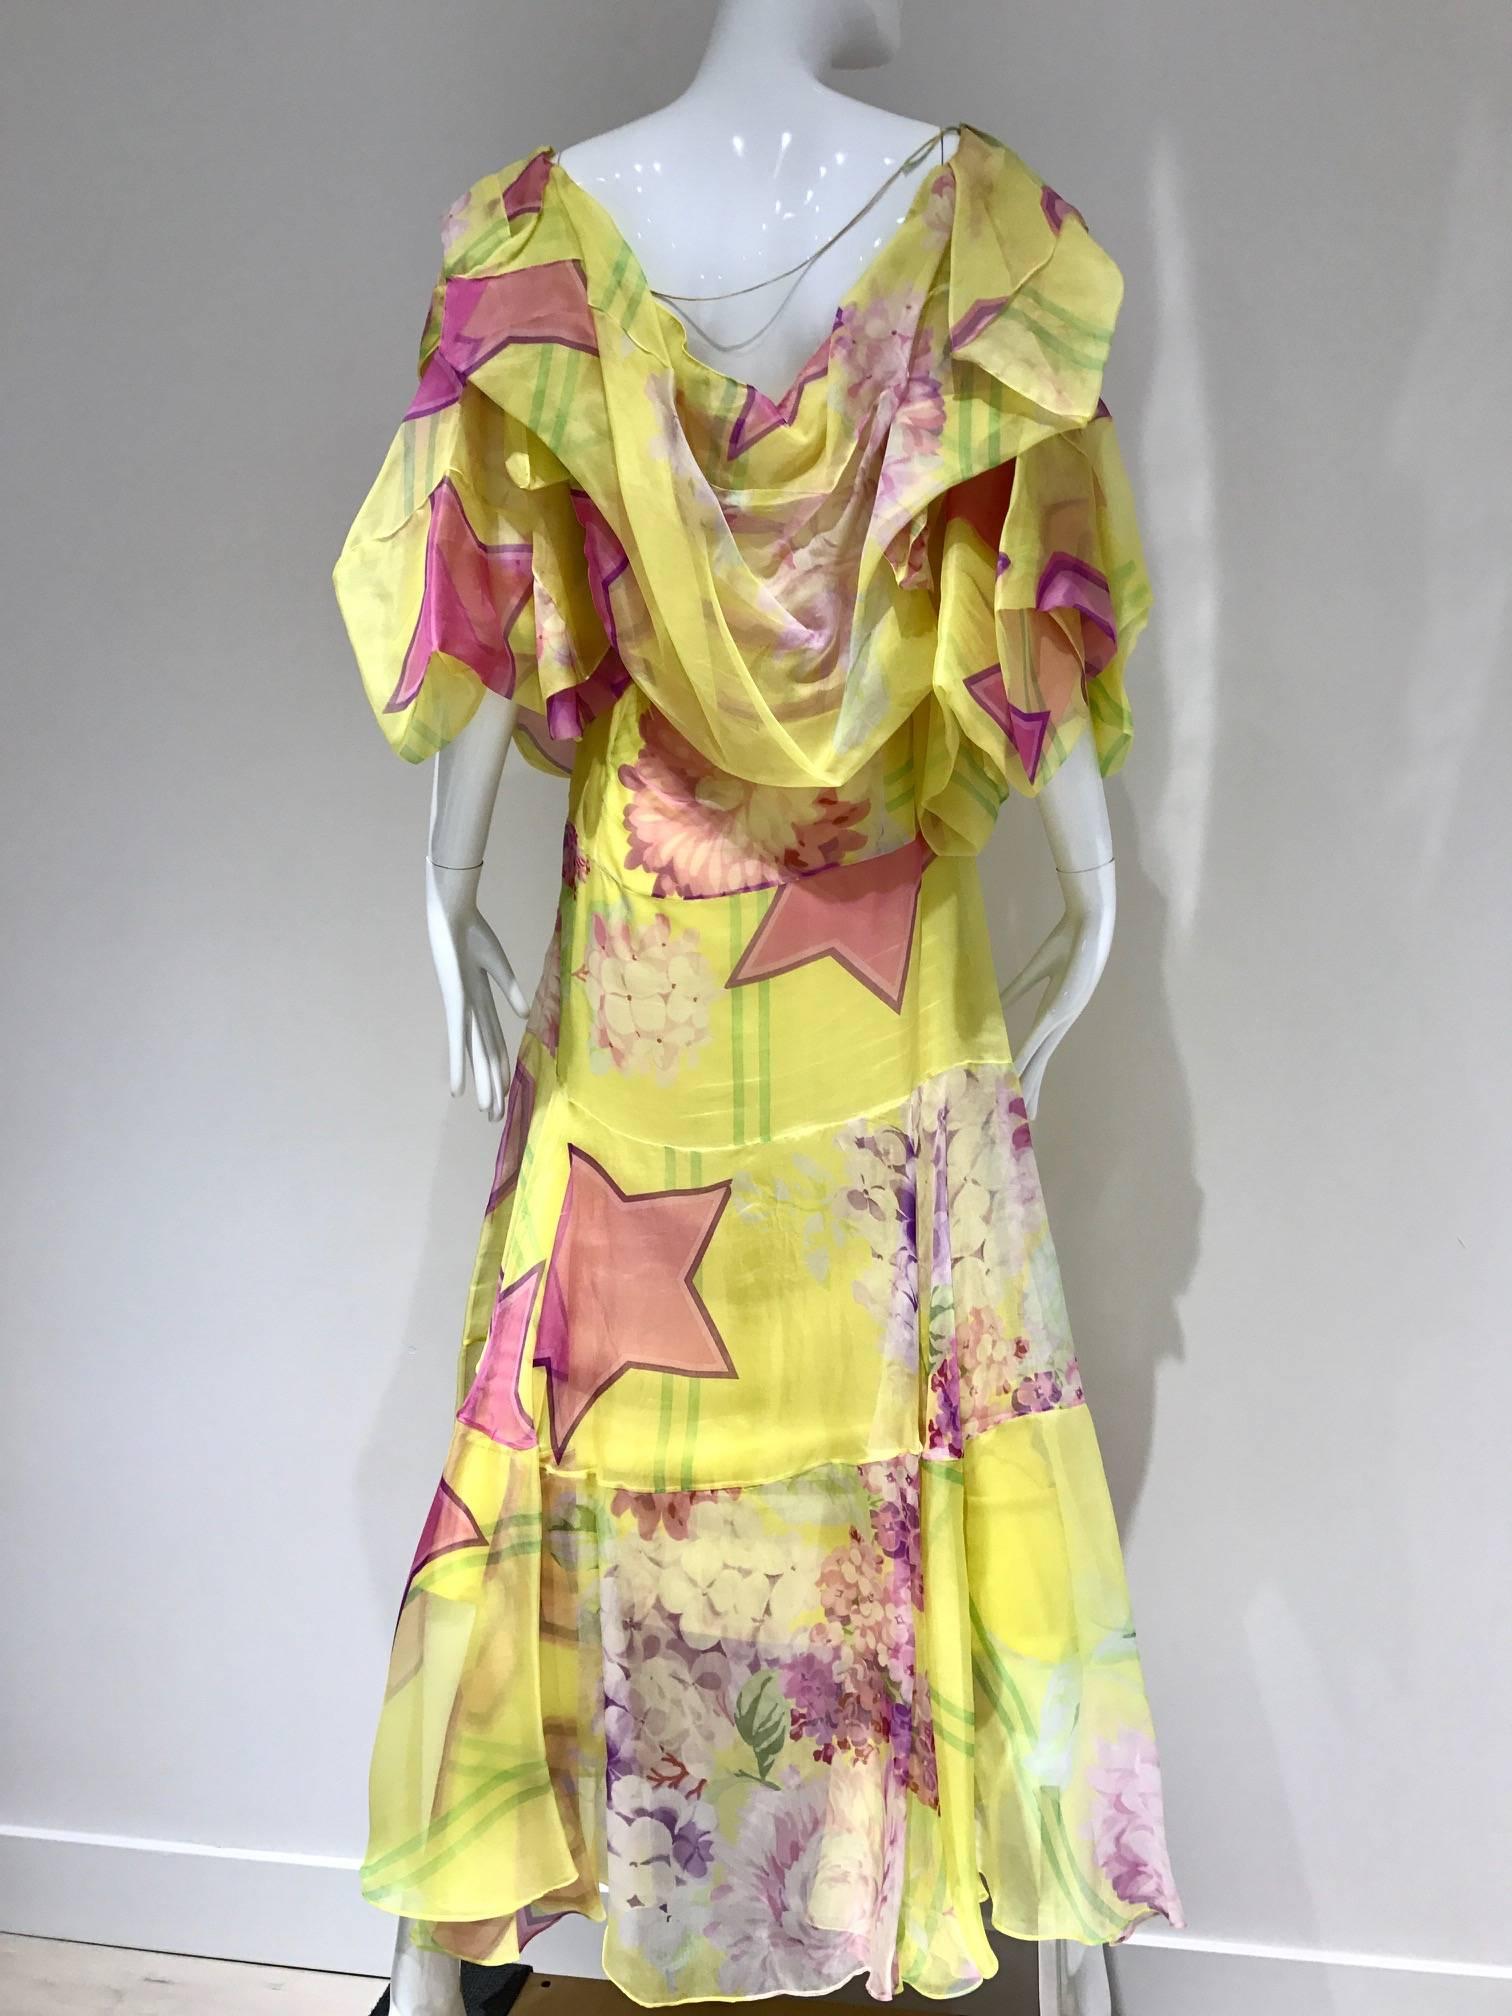 Christian Dior by john galliano yellow and pink silk print organza runway dress. Star and floral print trough out. Oversize off shoulder and dramatic sleeve.
Size 6 / Medium 
Bust: / Waist: / Hip: Length: 
*** This Garment has been professionally